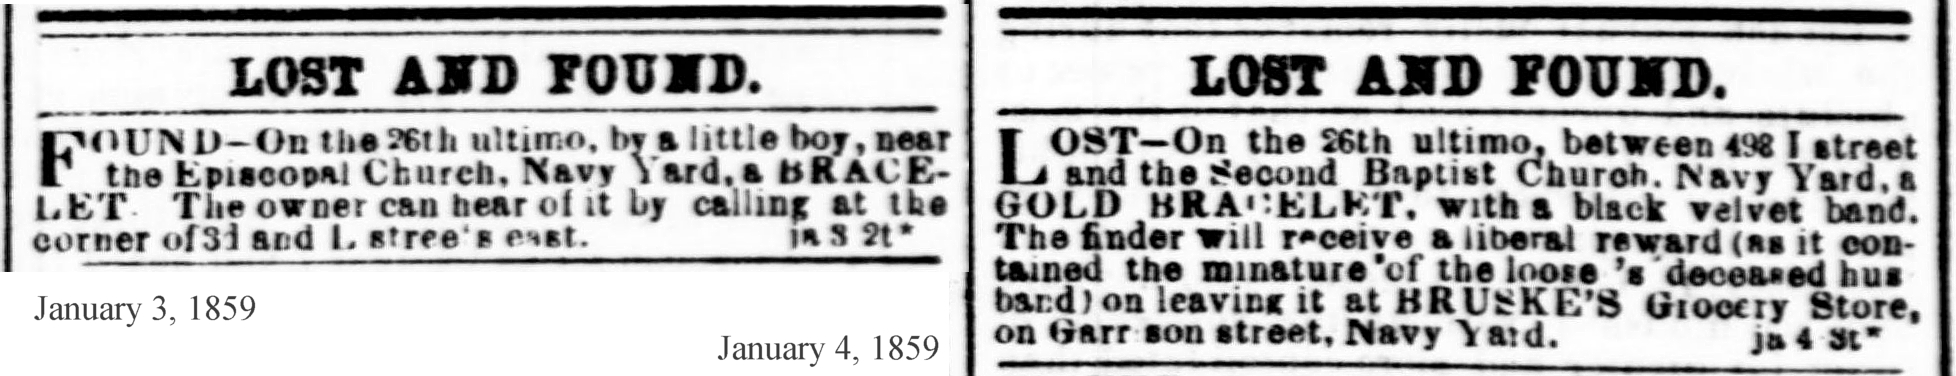 The two advertisements as they appeared in the Evening Star 150+ years ago. (LoC)